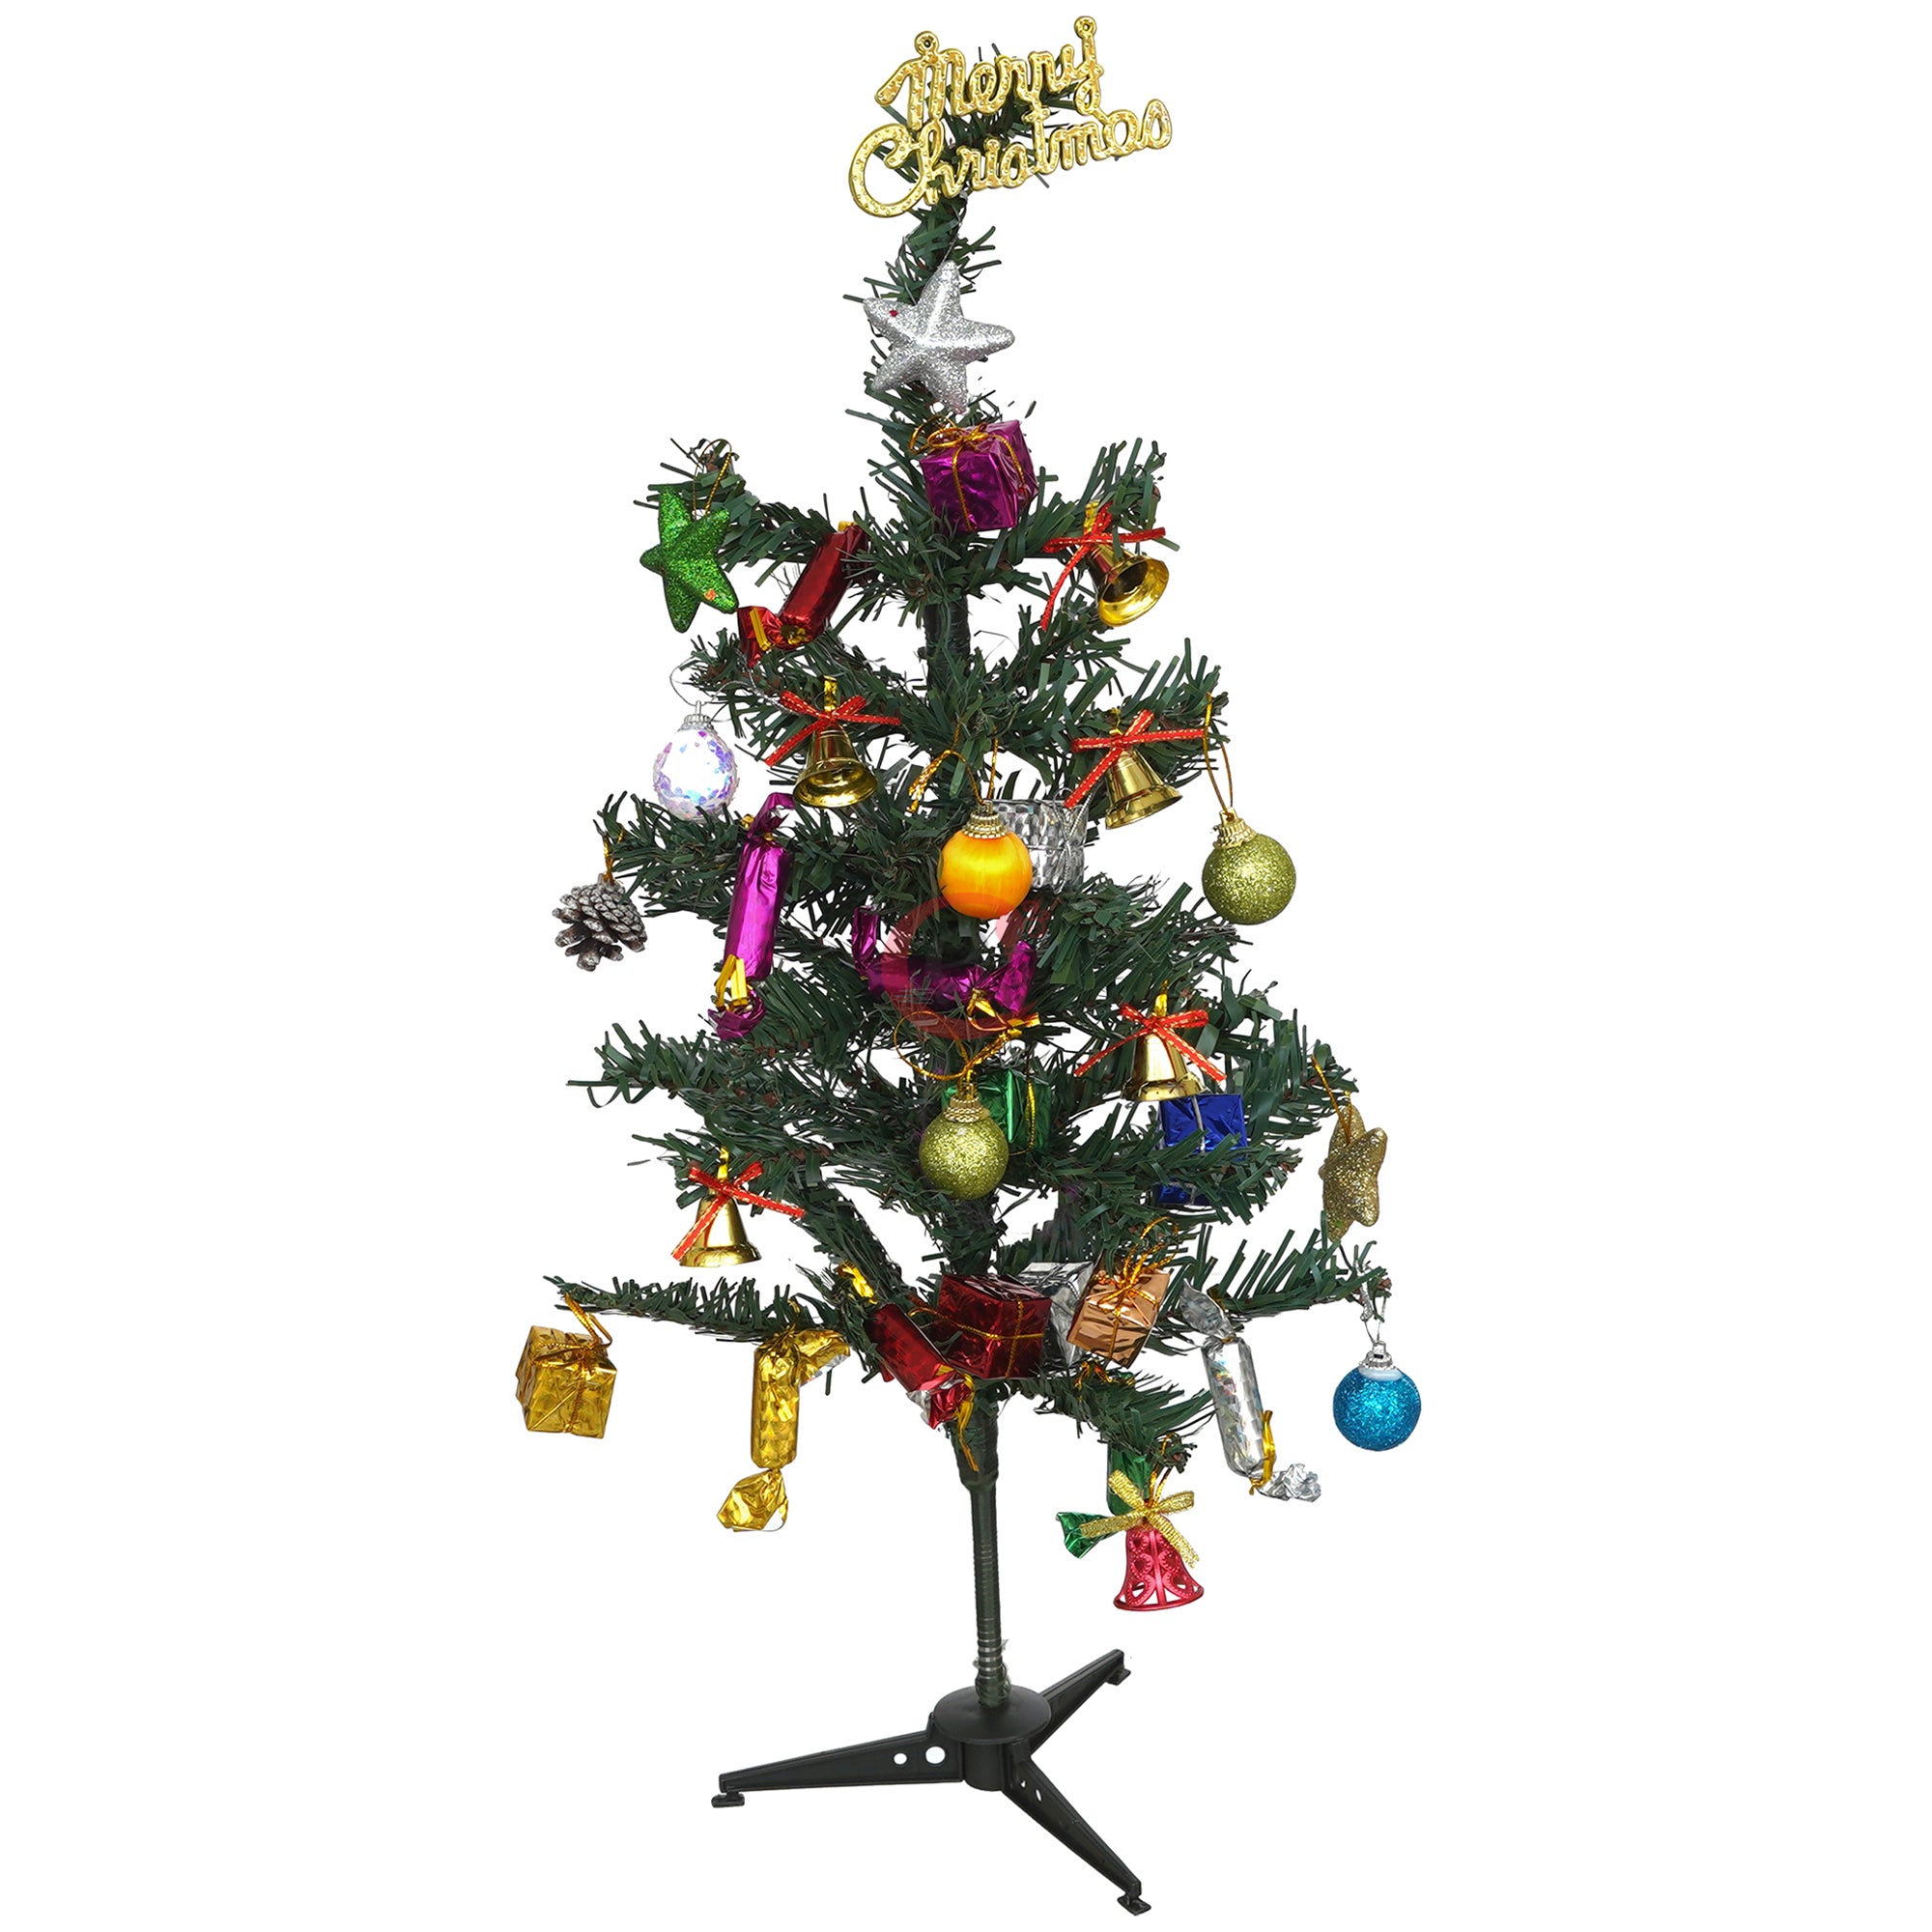 eCraftIndia 2 Feet Green Artificial Christmas Tree Xmas Pine Tree with Stand and 60 Christmas Decoration Ornaments Props - Merry Christmas Decoration Item for Home, Office, and Church 7